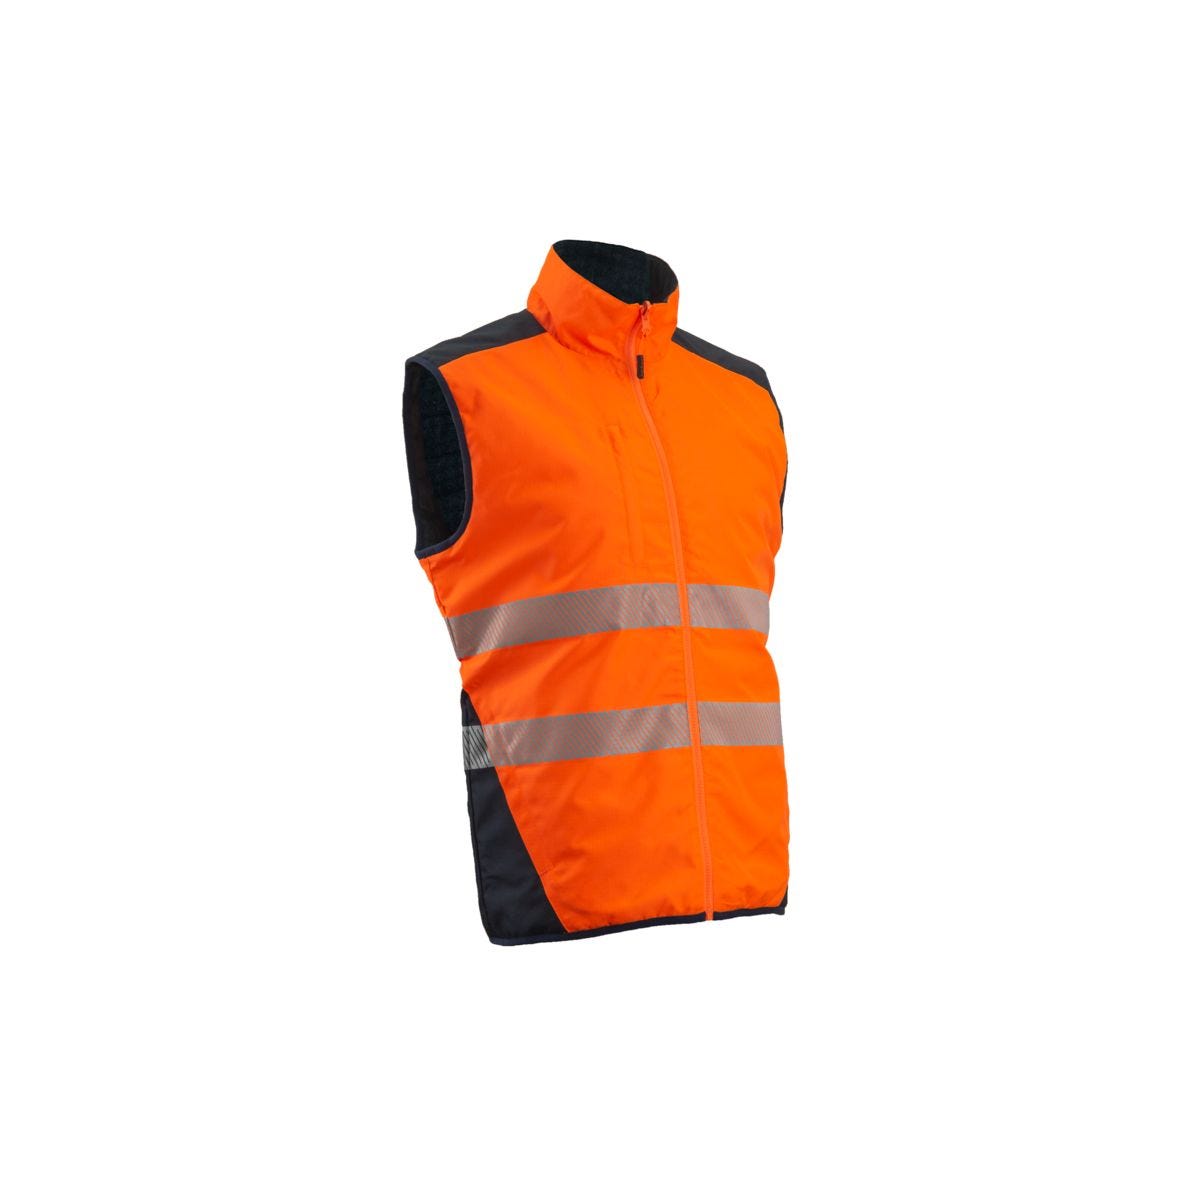 Gilet YORU froid réversible orange HV/marine Ripstop 100%PES maille - COVERGUARD - Taille 3XL 0